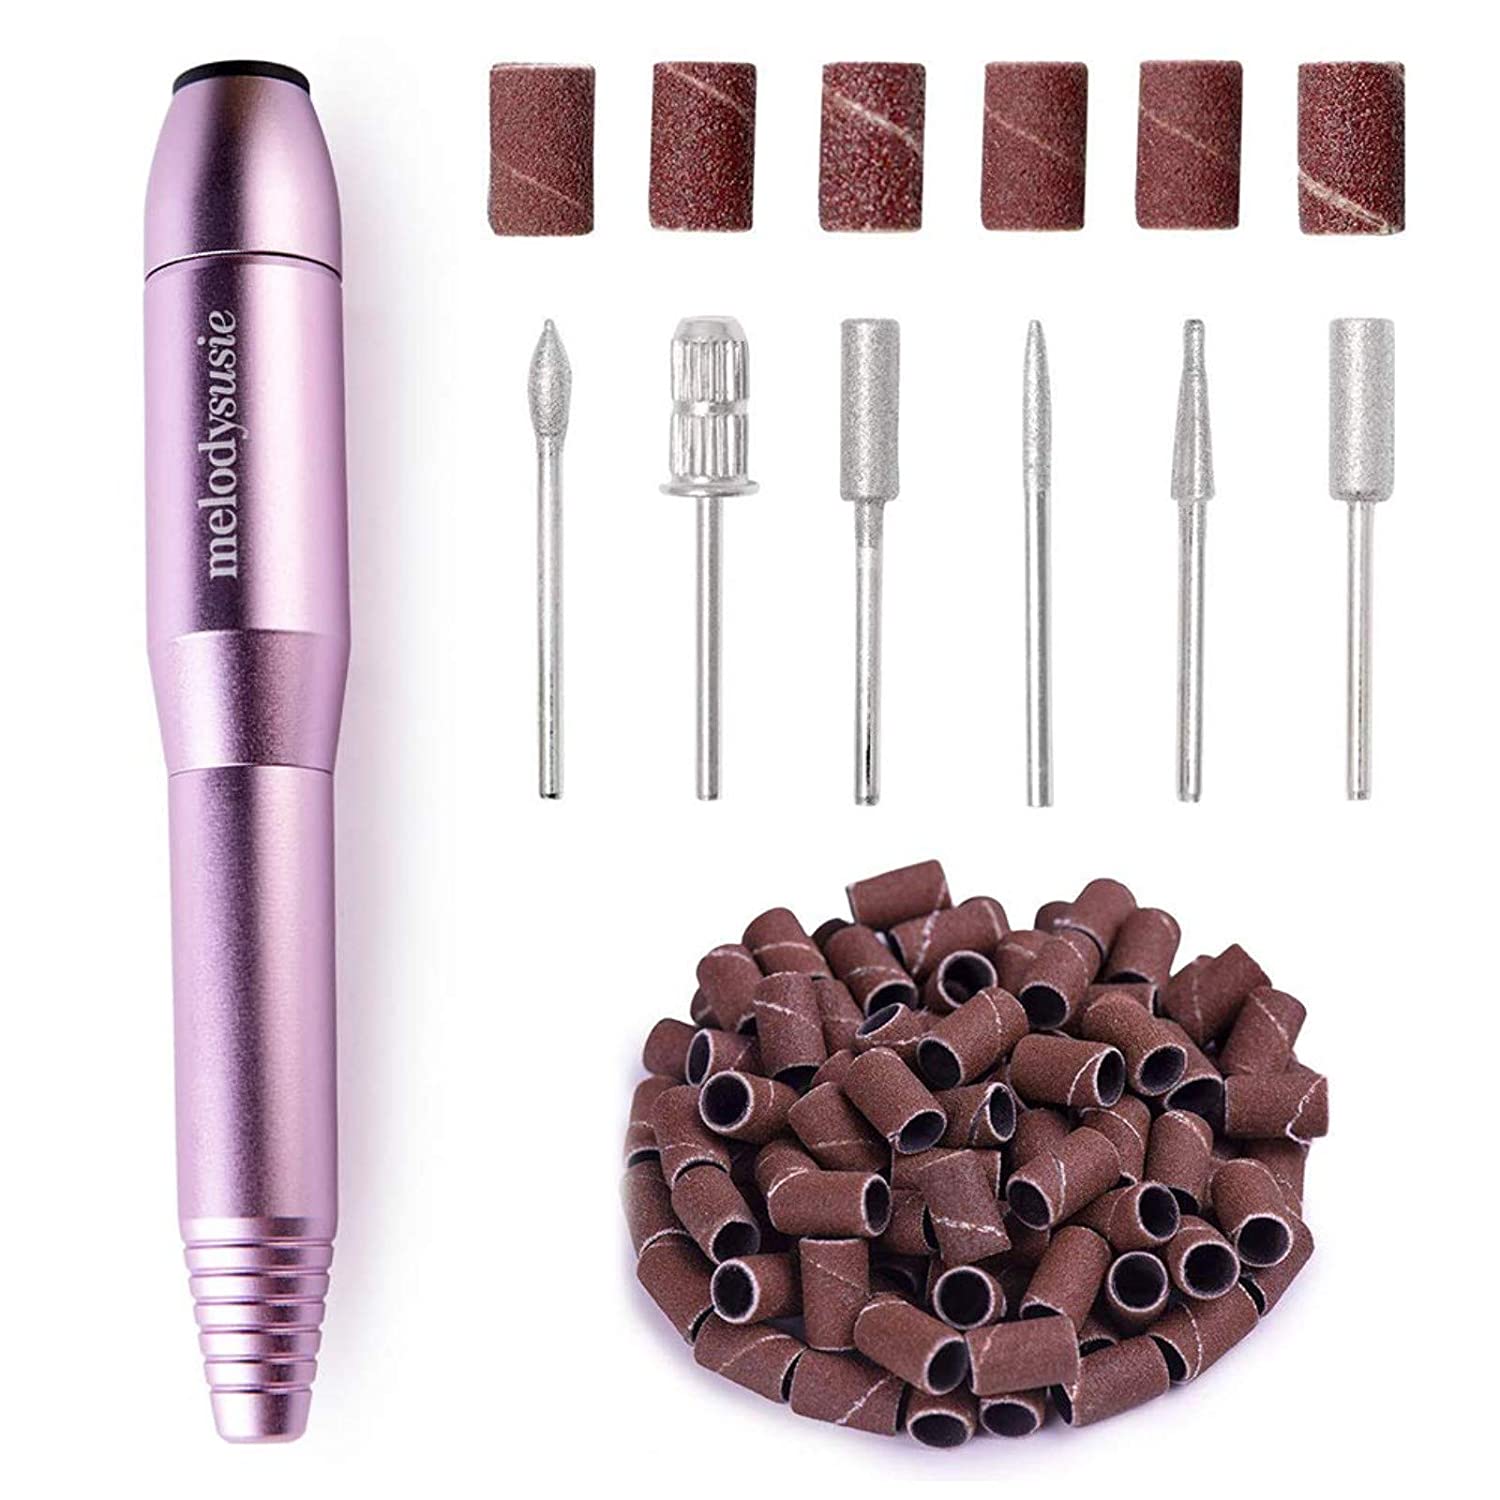  8. MelodySusie Electric Nail Drill Portable 